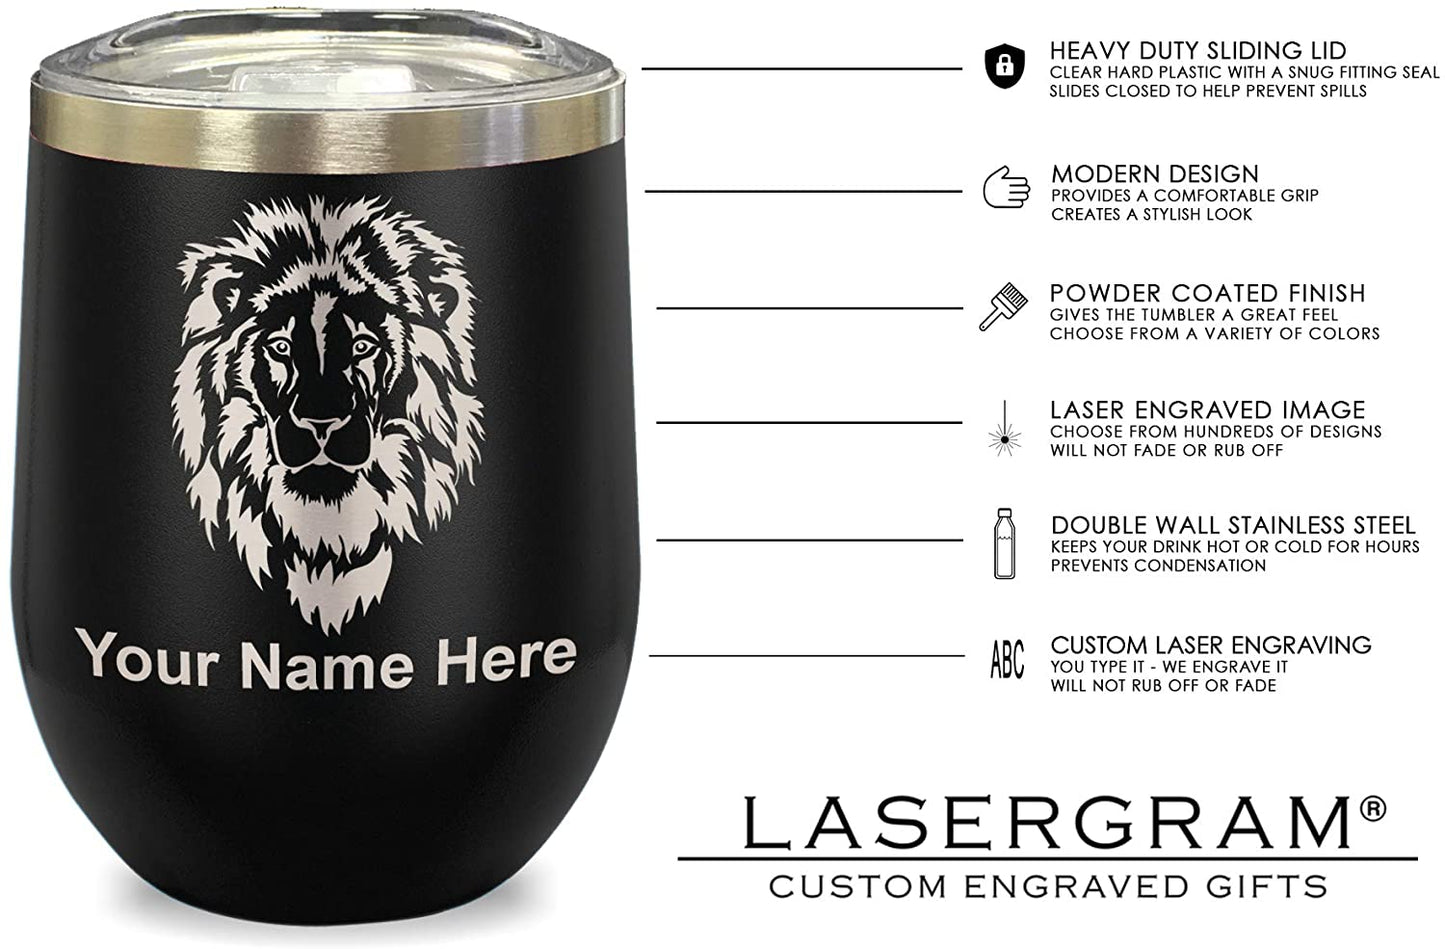 LaserGram Double Wall Stainless Steel Wine Glass, Biohazard Symbol, Personalized Engraving Included